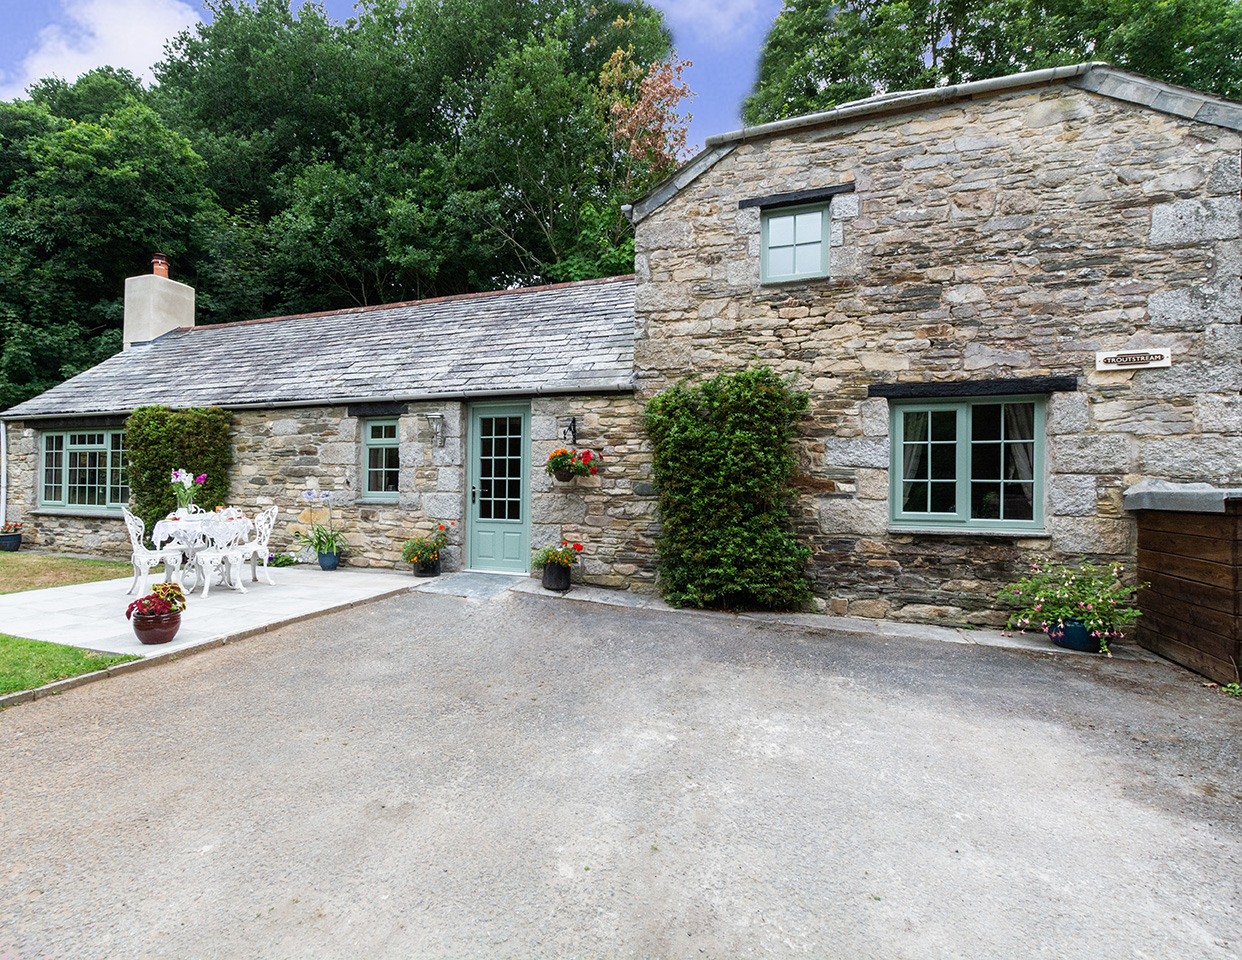 The exterior of Troutstream luxury self catering converted barn holiday cottage at Penrose Burden in North Cornwall 02.jpg